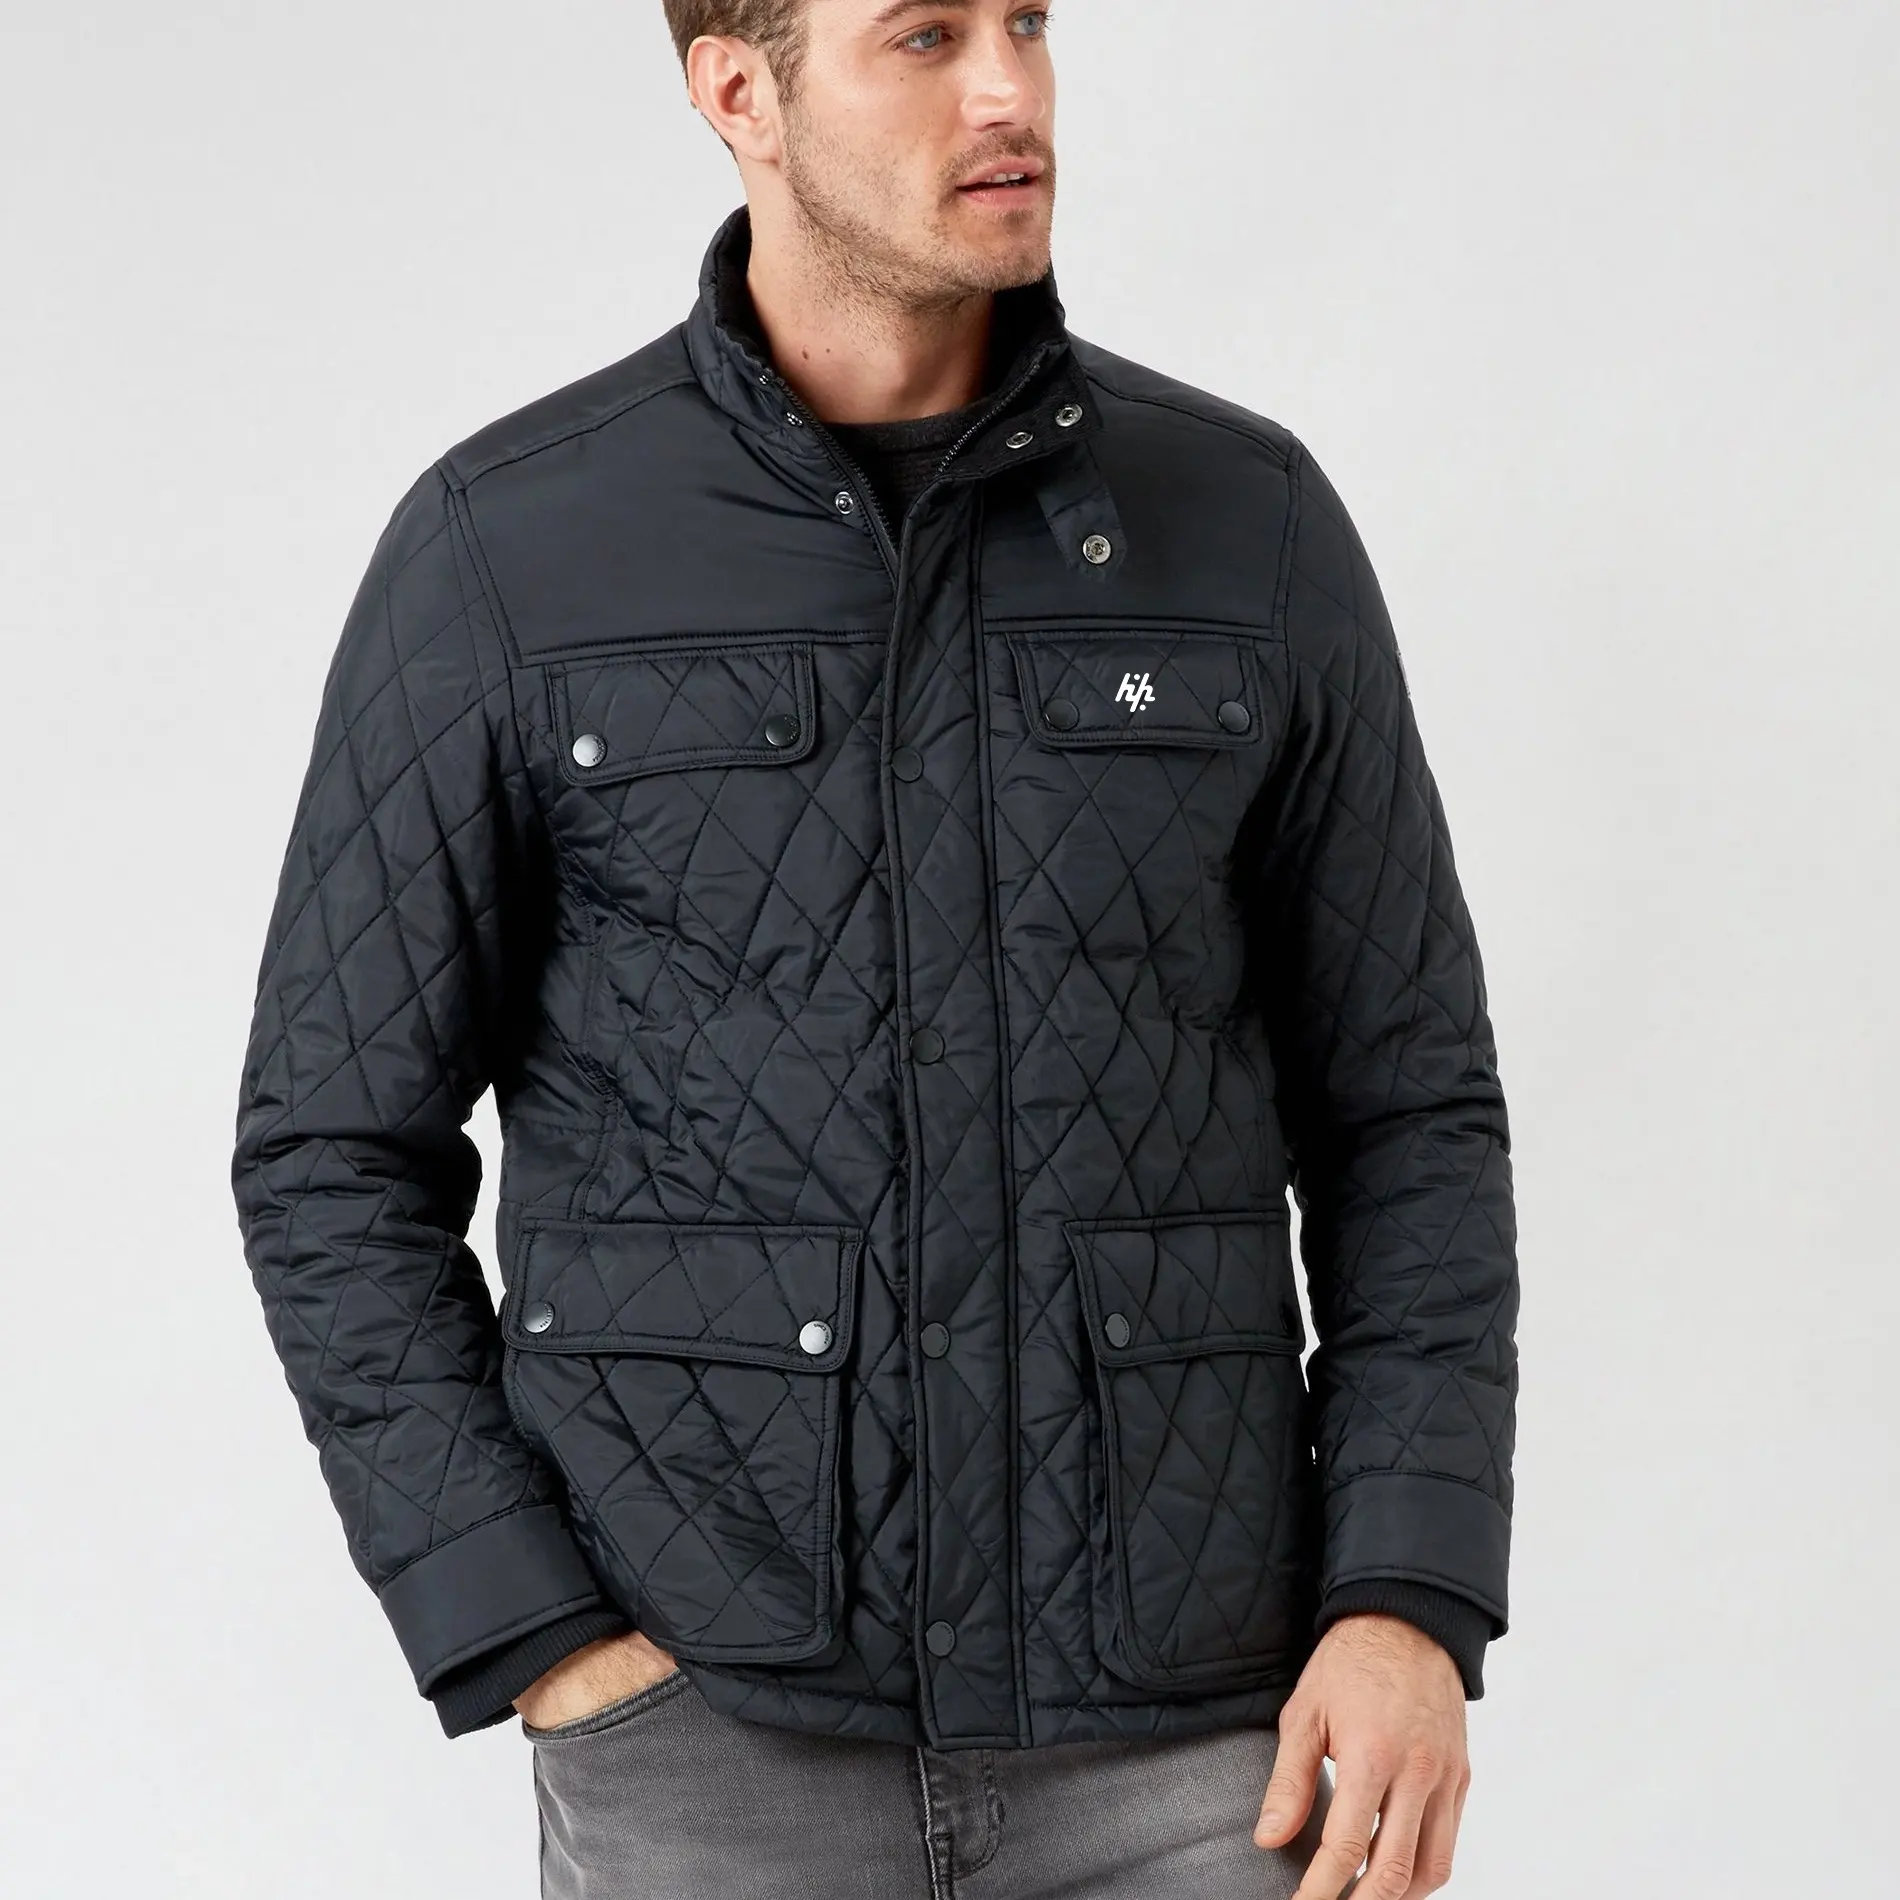 New Style Men's Black Quilted Jacket Long sleeves Men Bomber Jacket OEM ( Manufacture By Huzaifa Products )